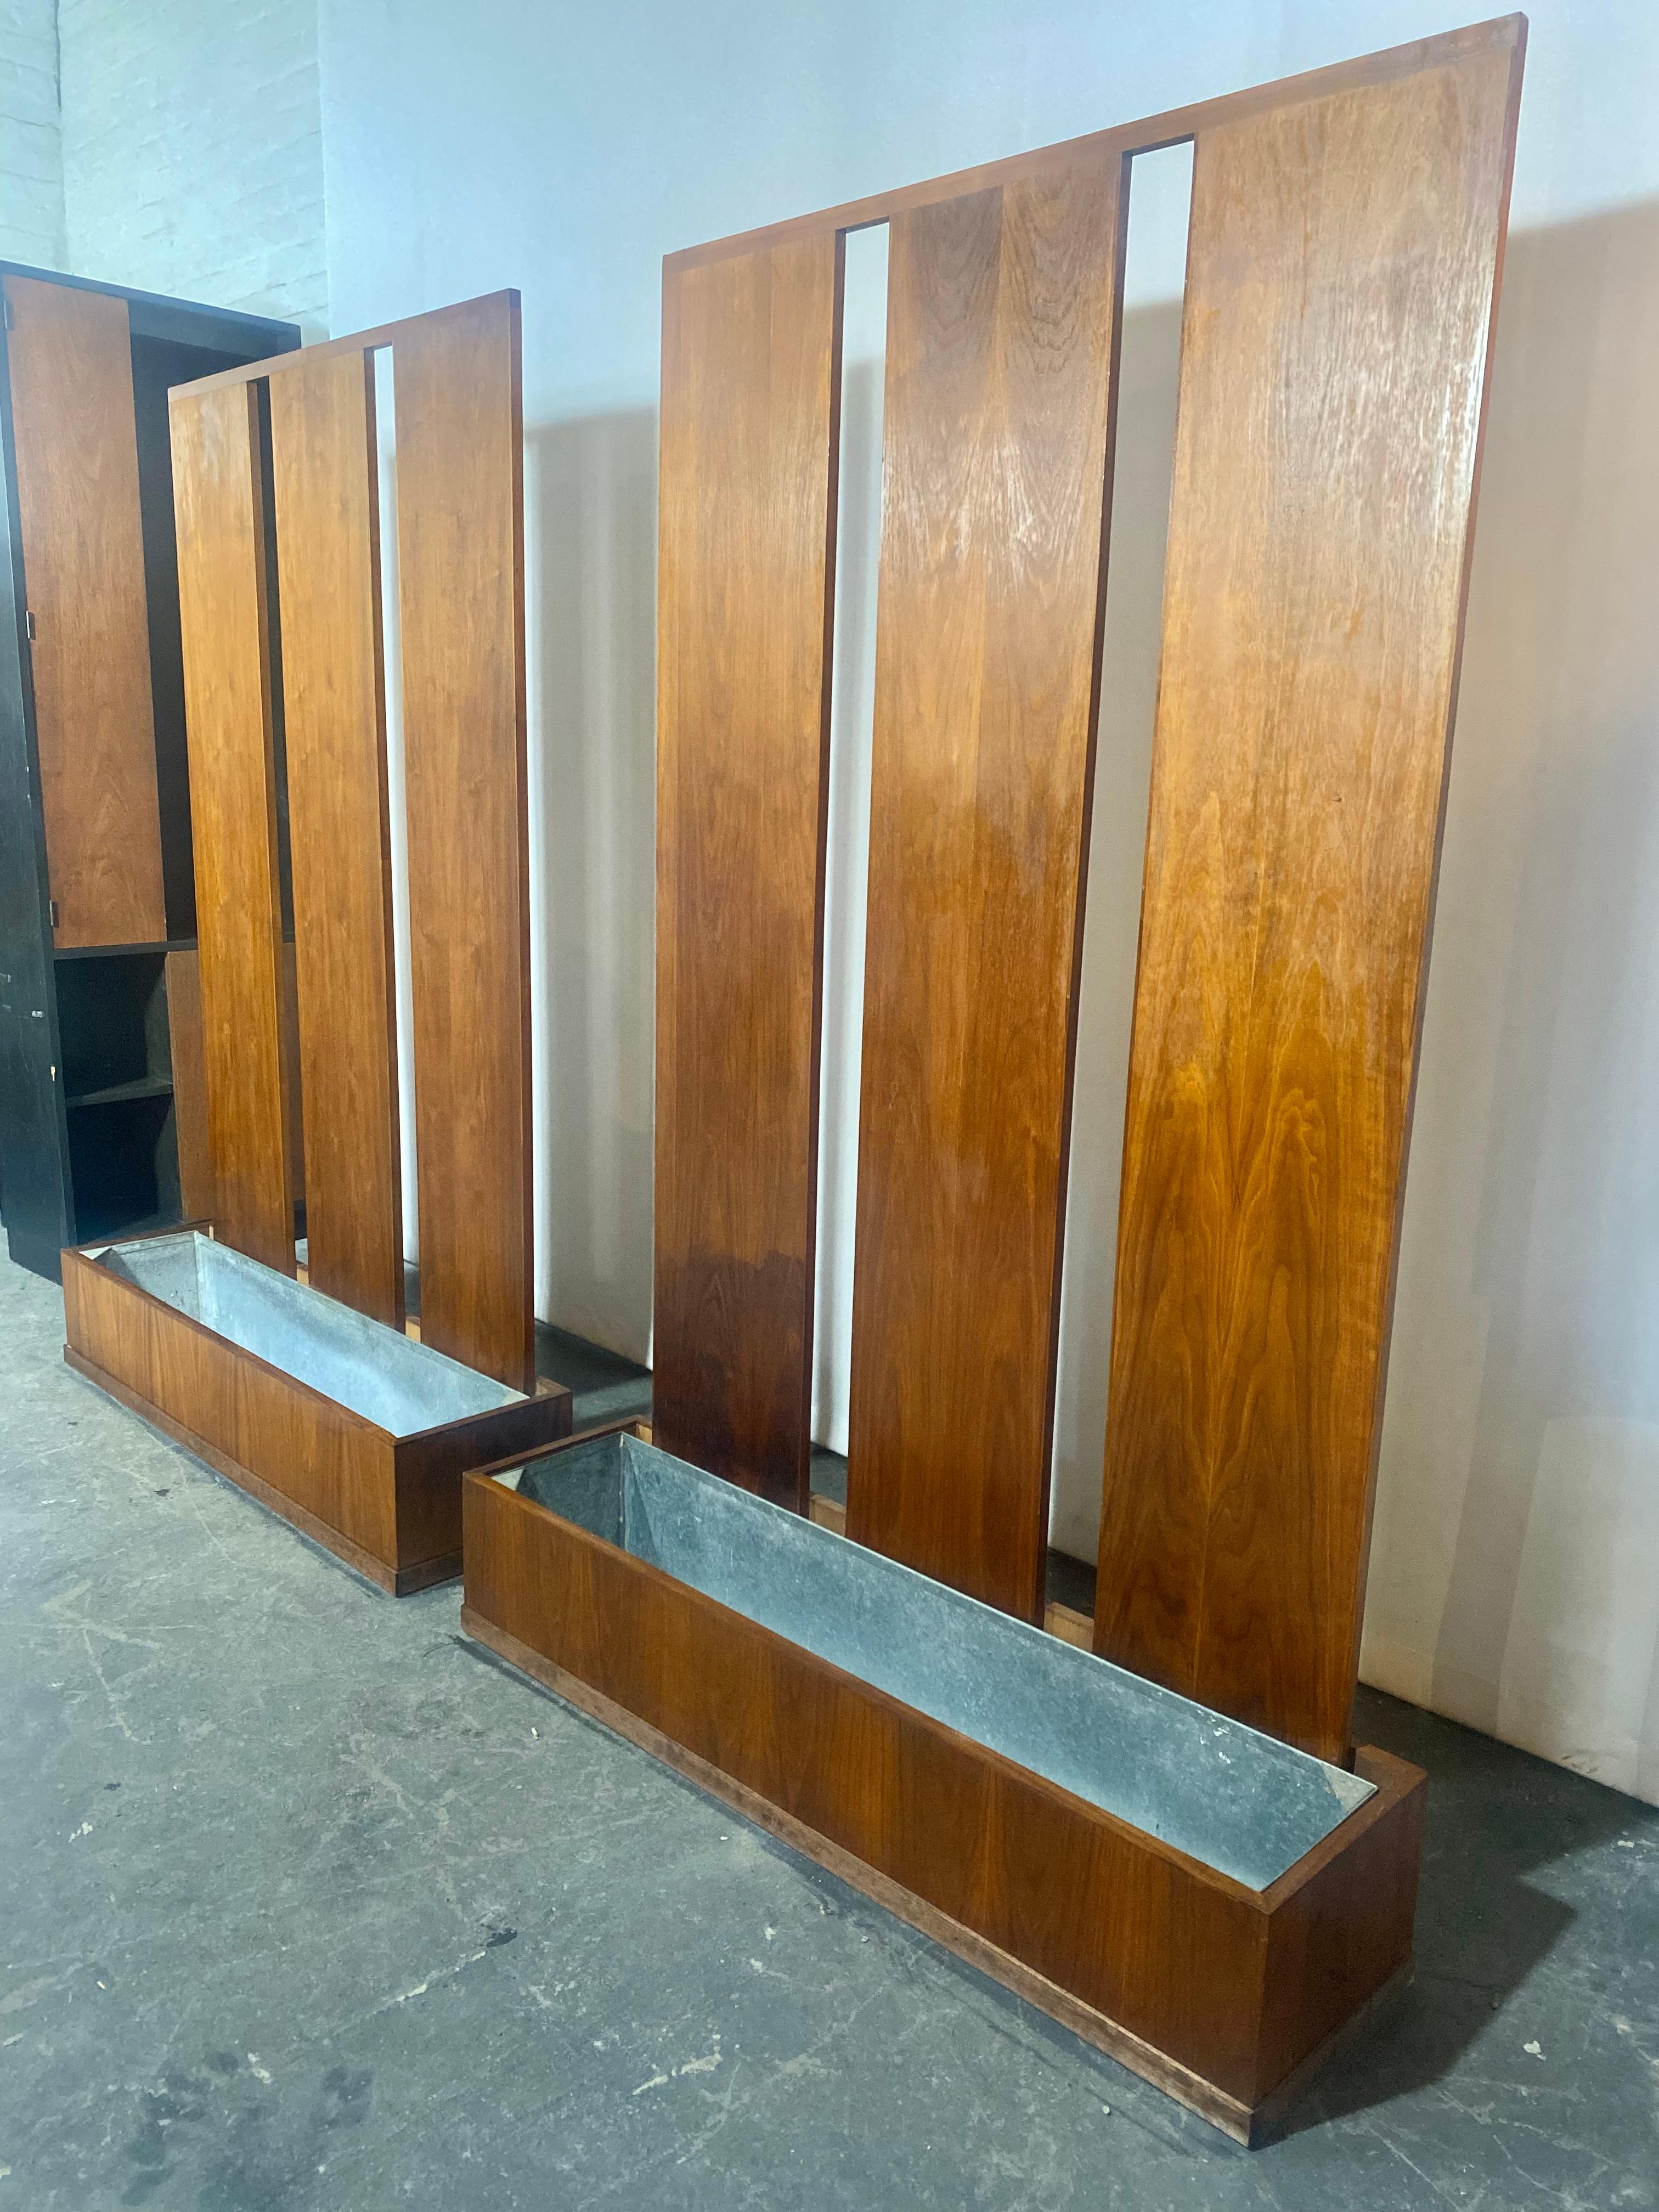 Classic Mid Century Modern Architectural Room Divider's with planter boxes For Sale 1